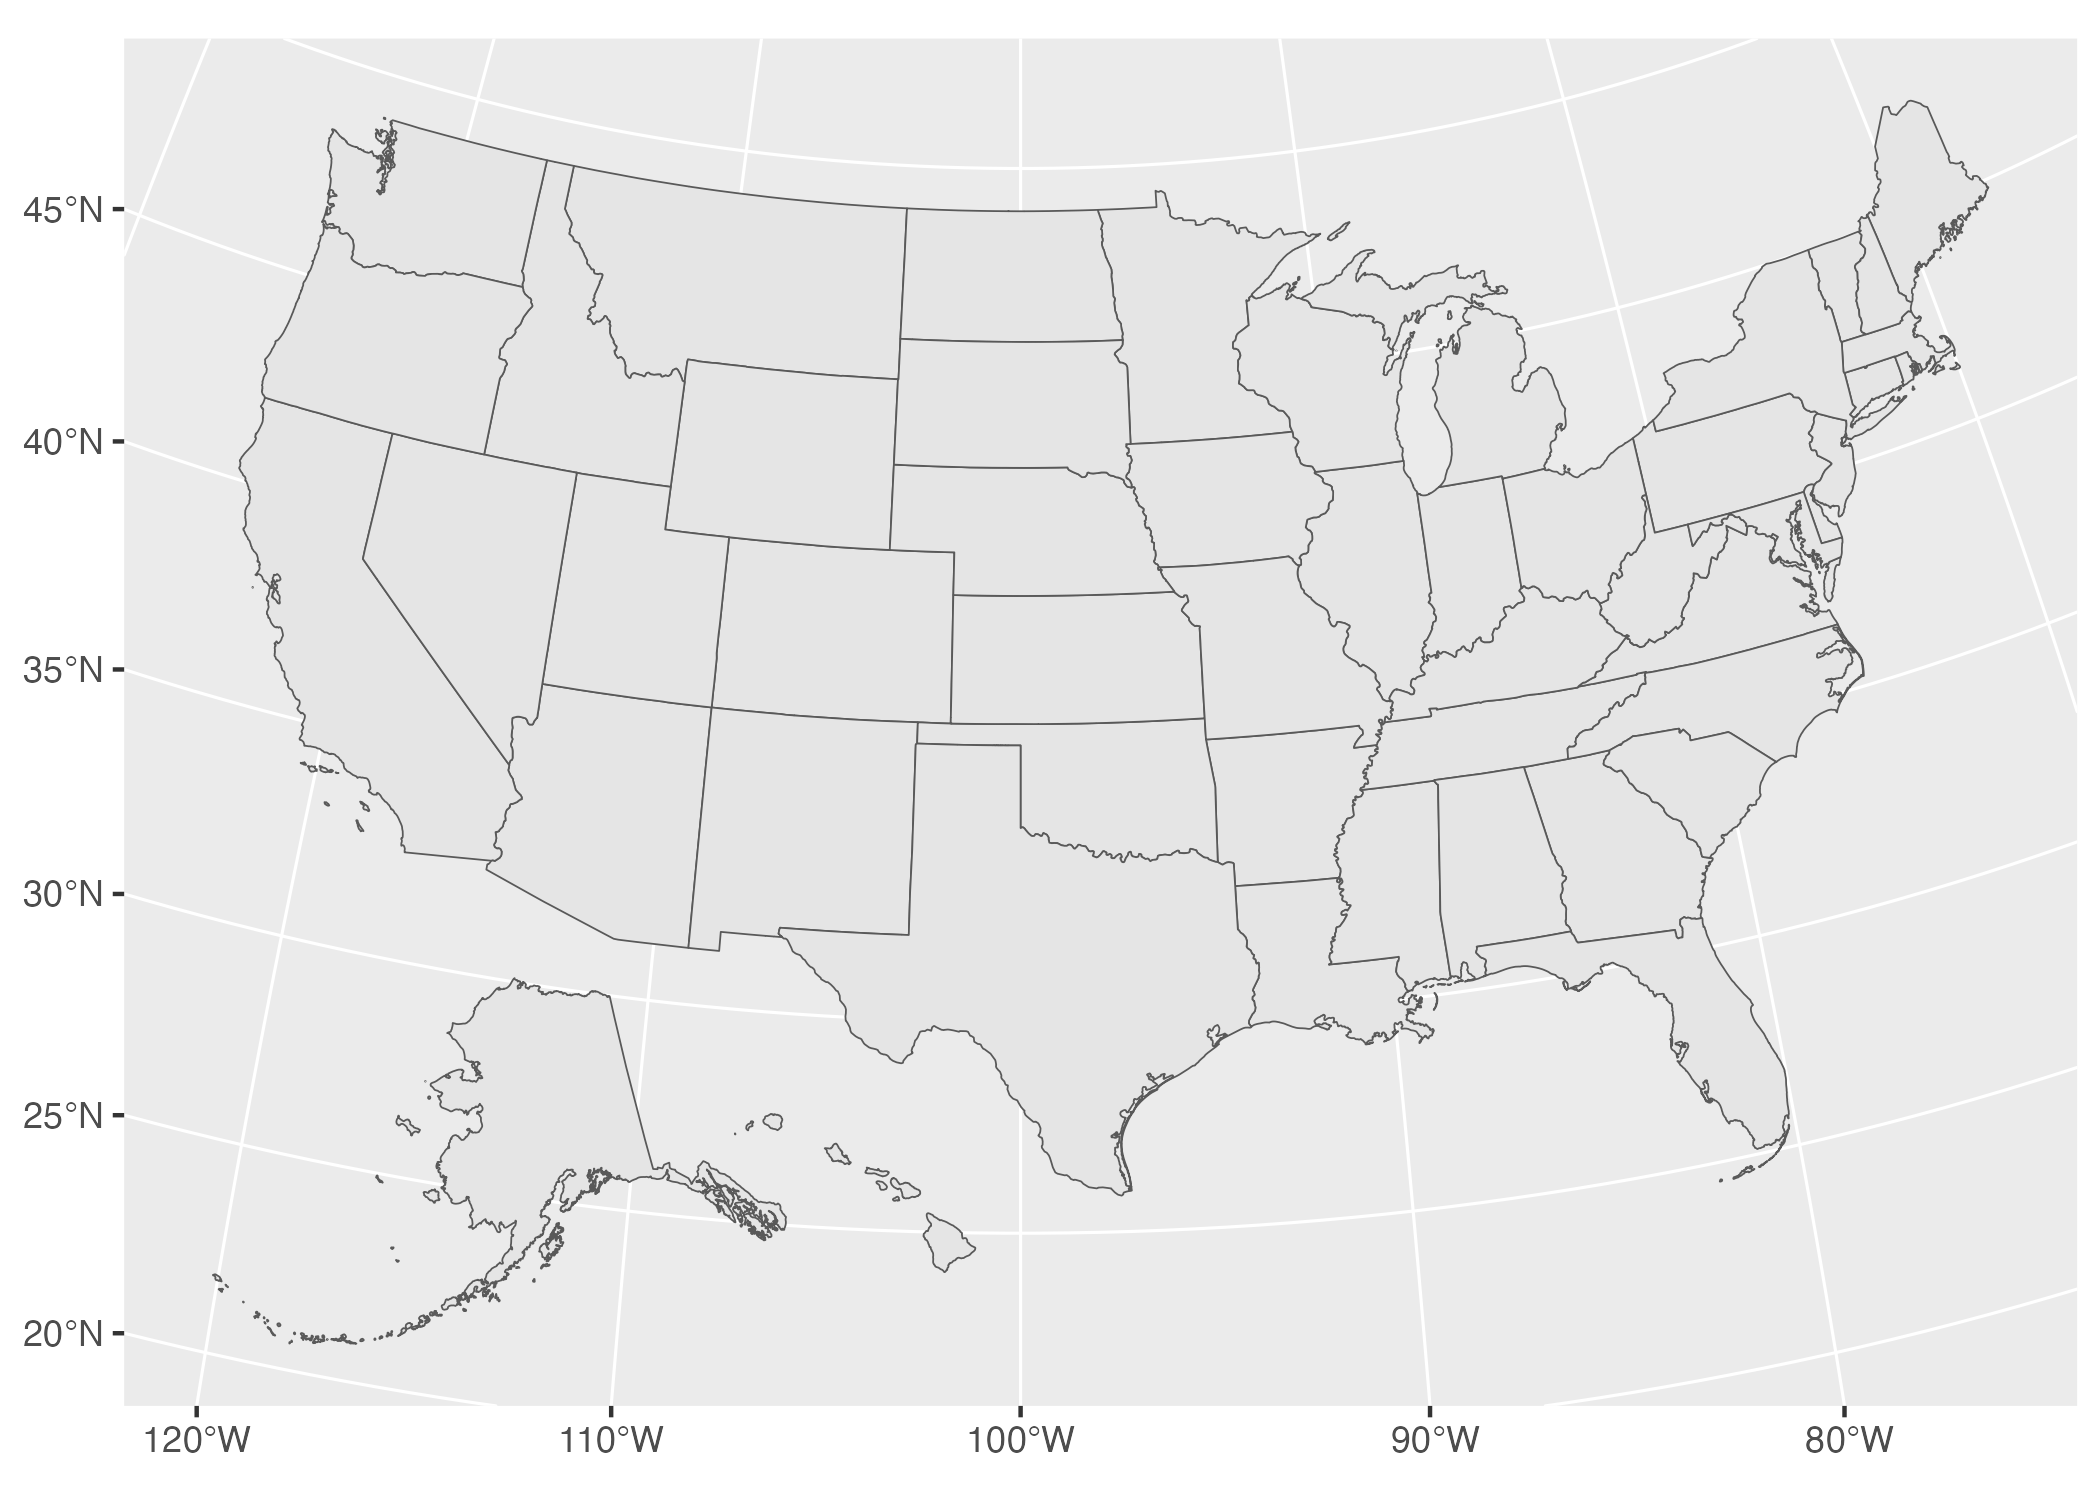 A map of the United States using the Albers equal-area conic convenience projection